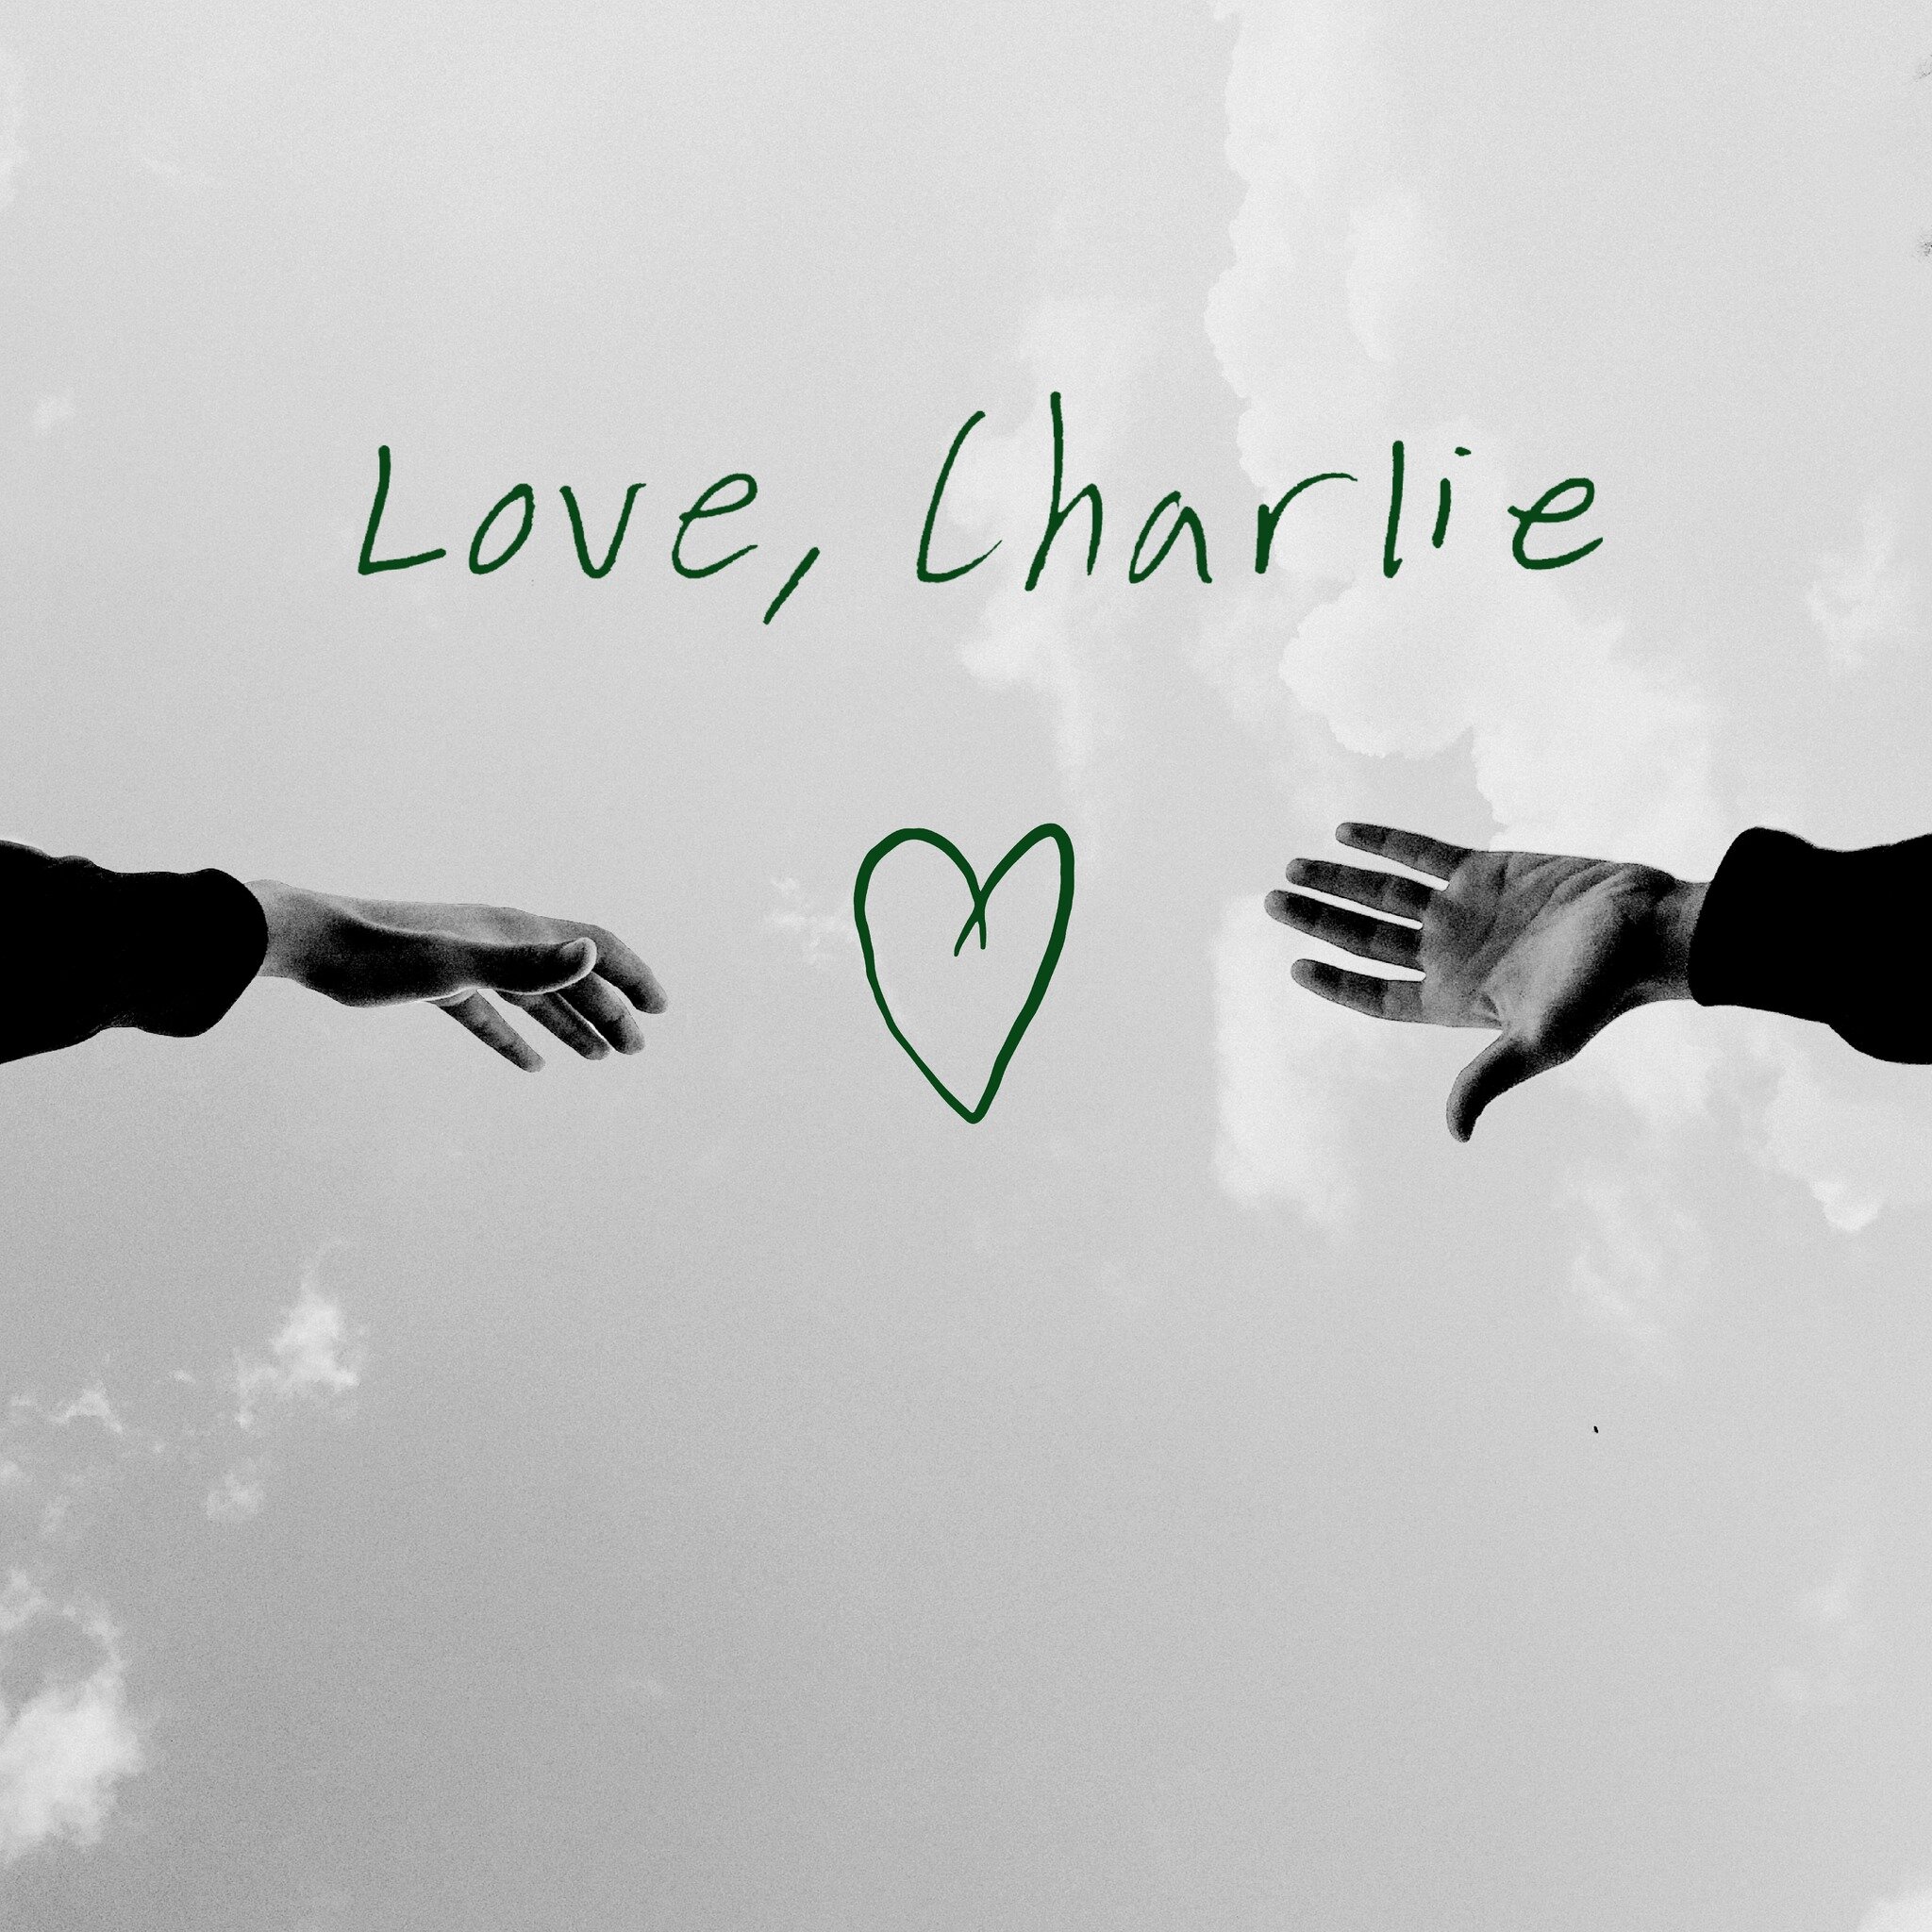 We were lucky enough to do a 2 Day Design Intensive with @lovecharlieproject this summer! This nonprofit organization was created by a wonderful group to&hellip;
🤍 honor Charlie Covina, a beloved son, brother and friend who lost his battle with ment